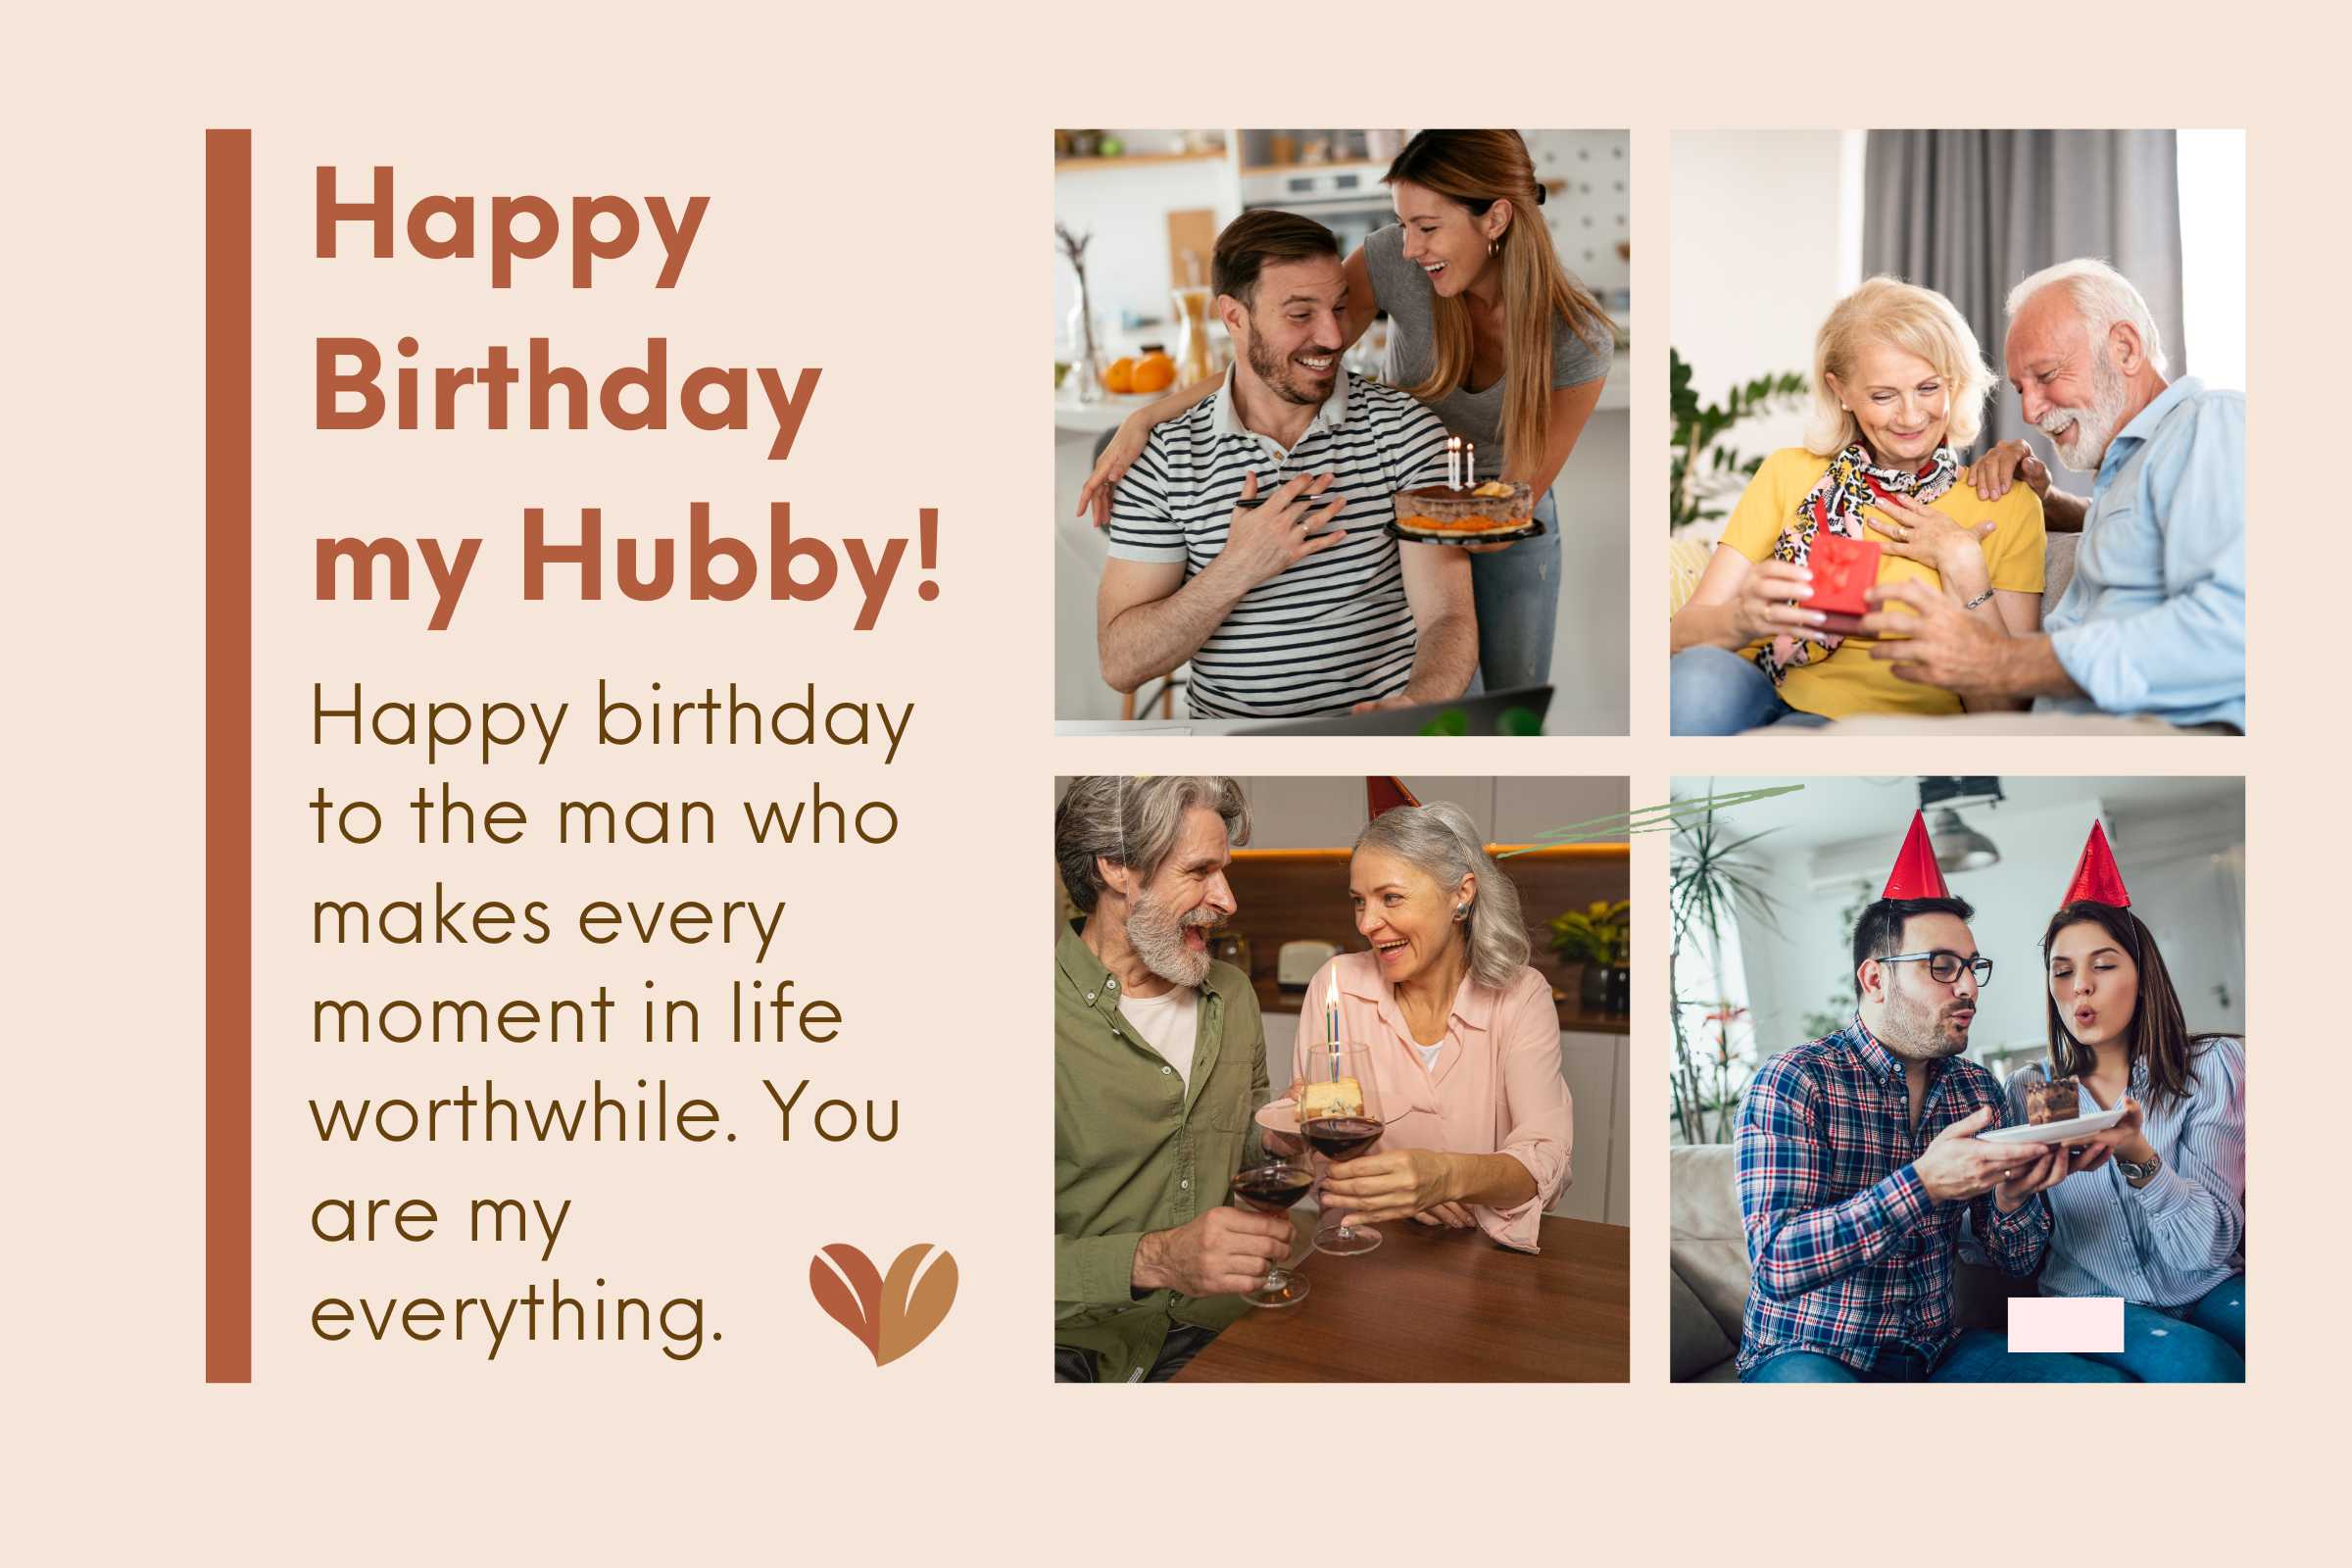 I am blessed to call you my husband: hubby birthday wishes